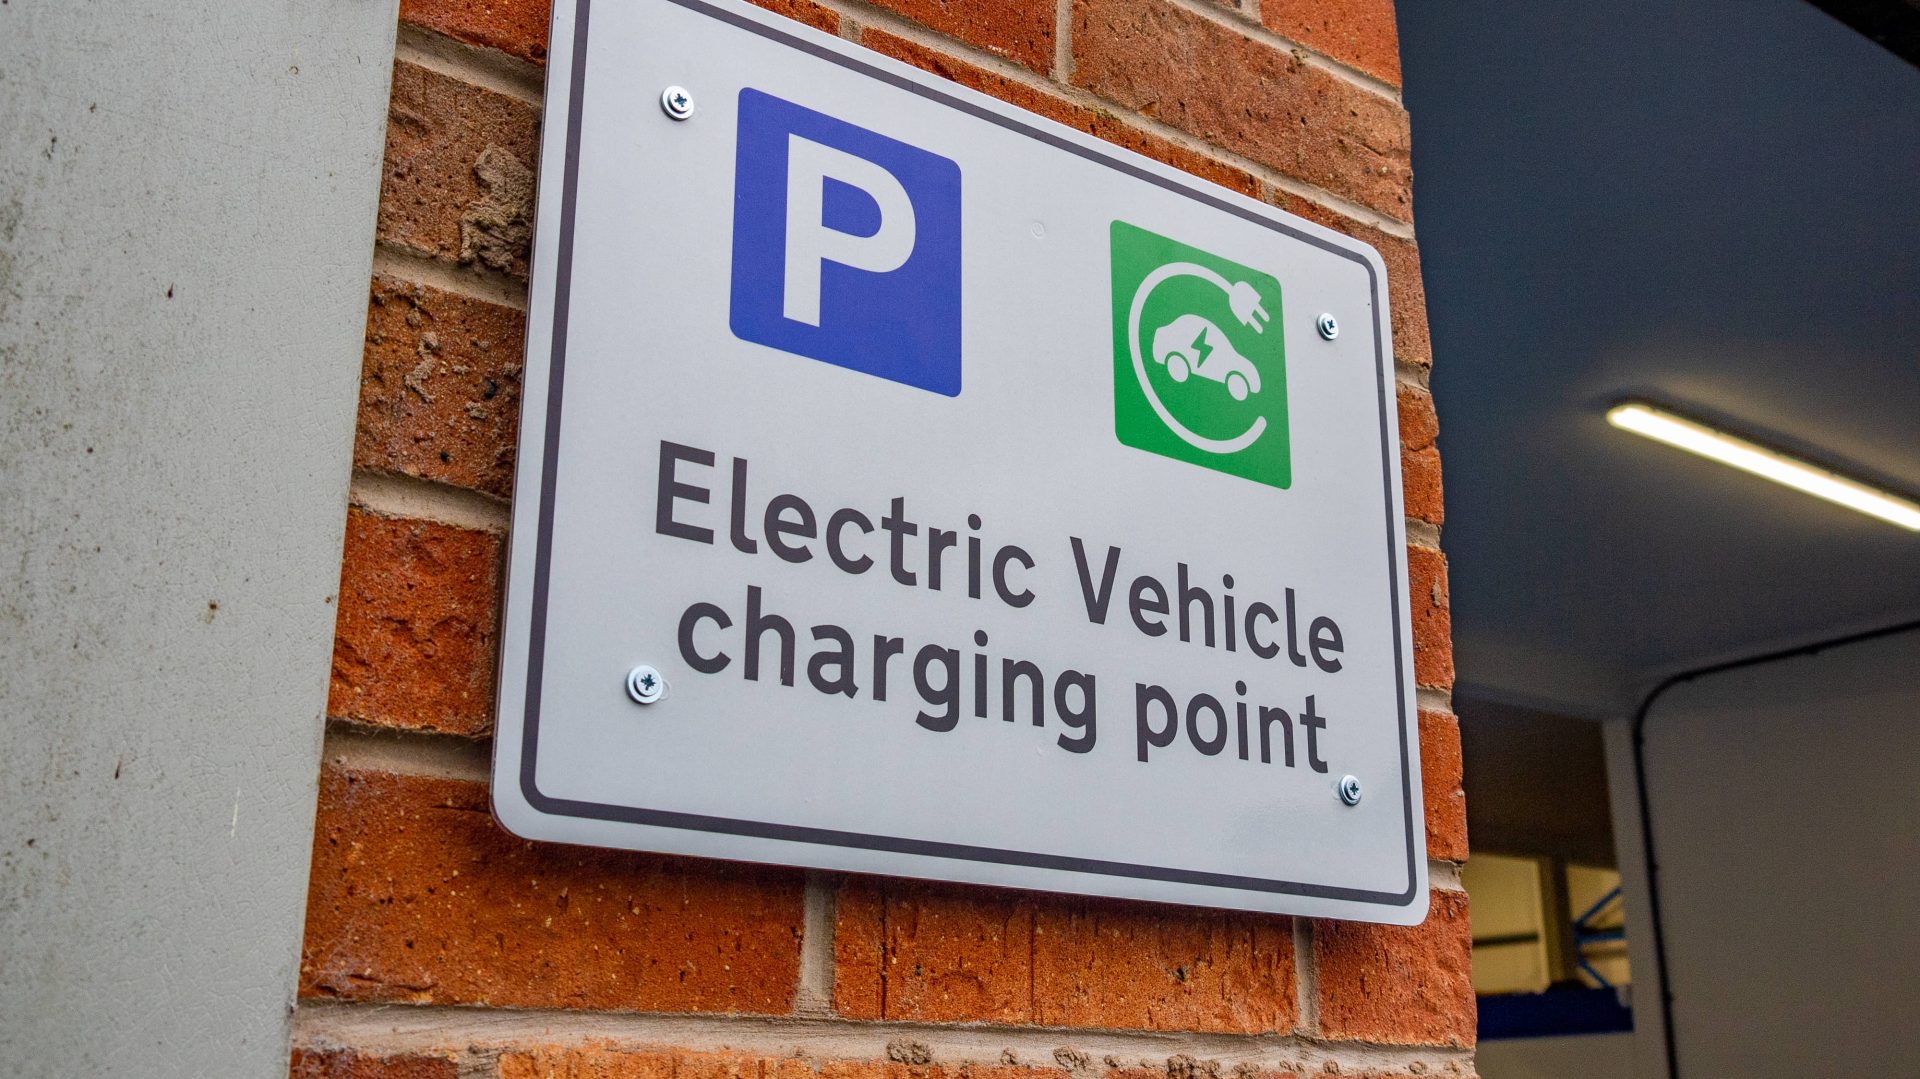 Electric Vehicle Charger Bolton Electric Car & Van Hire